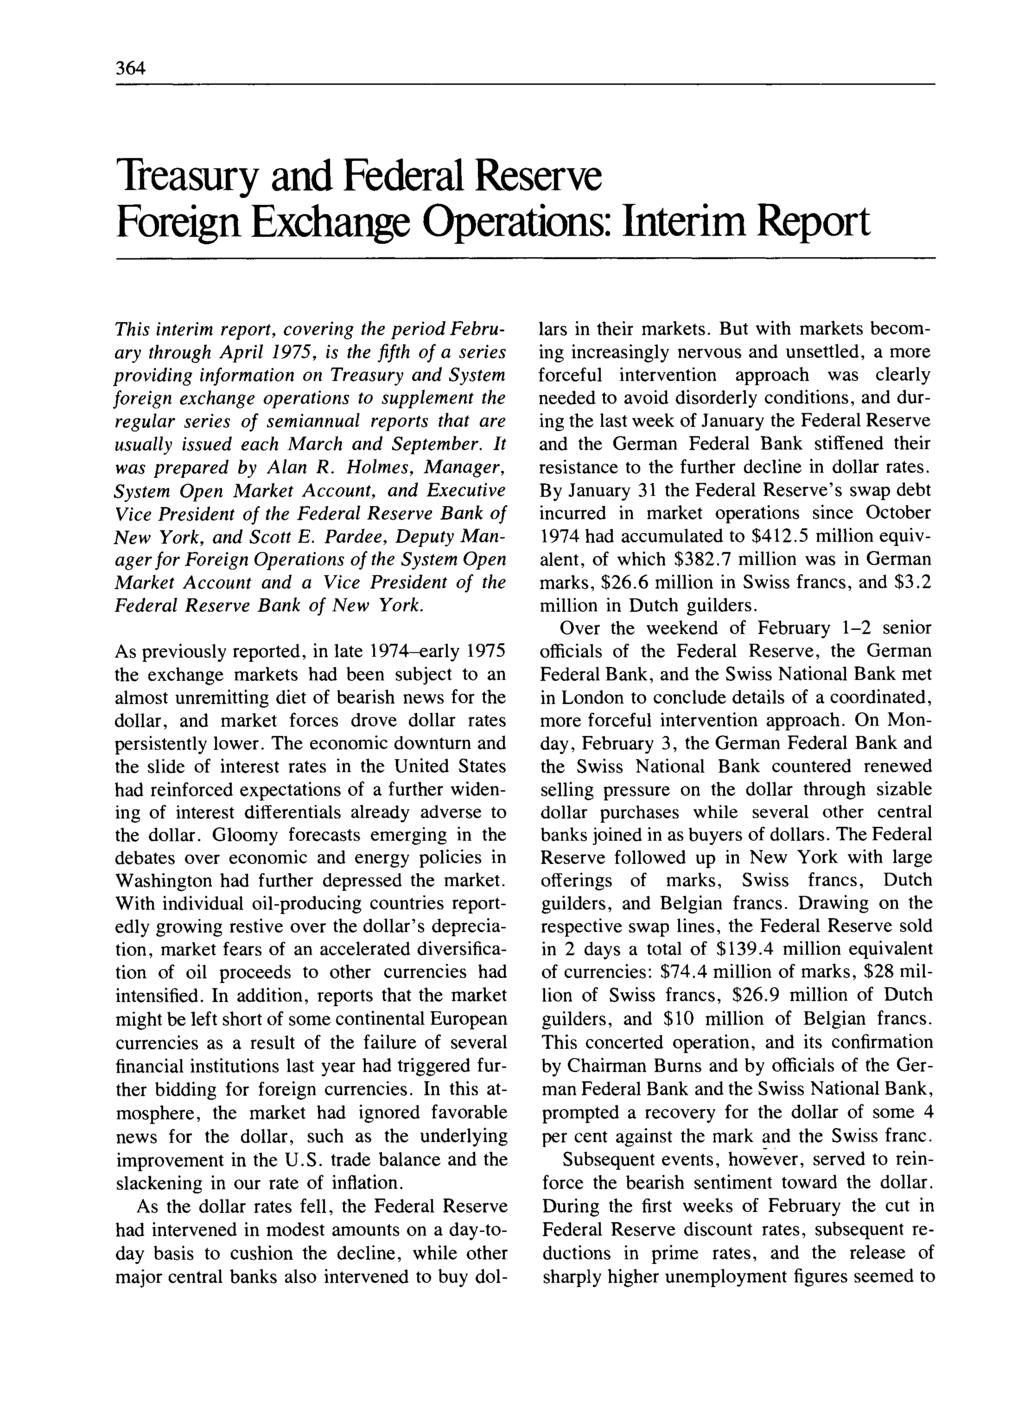 364 Treasury and Federal Reserve Foreign Exchange Operations: Interim Report This interim report, covering the period February through April 1975, is the fifth of a series providing information on